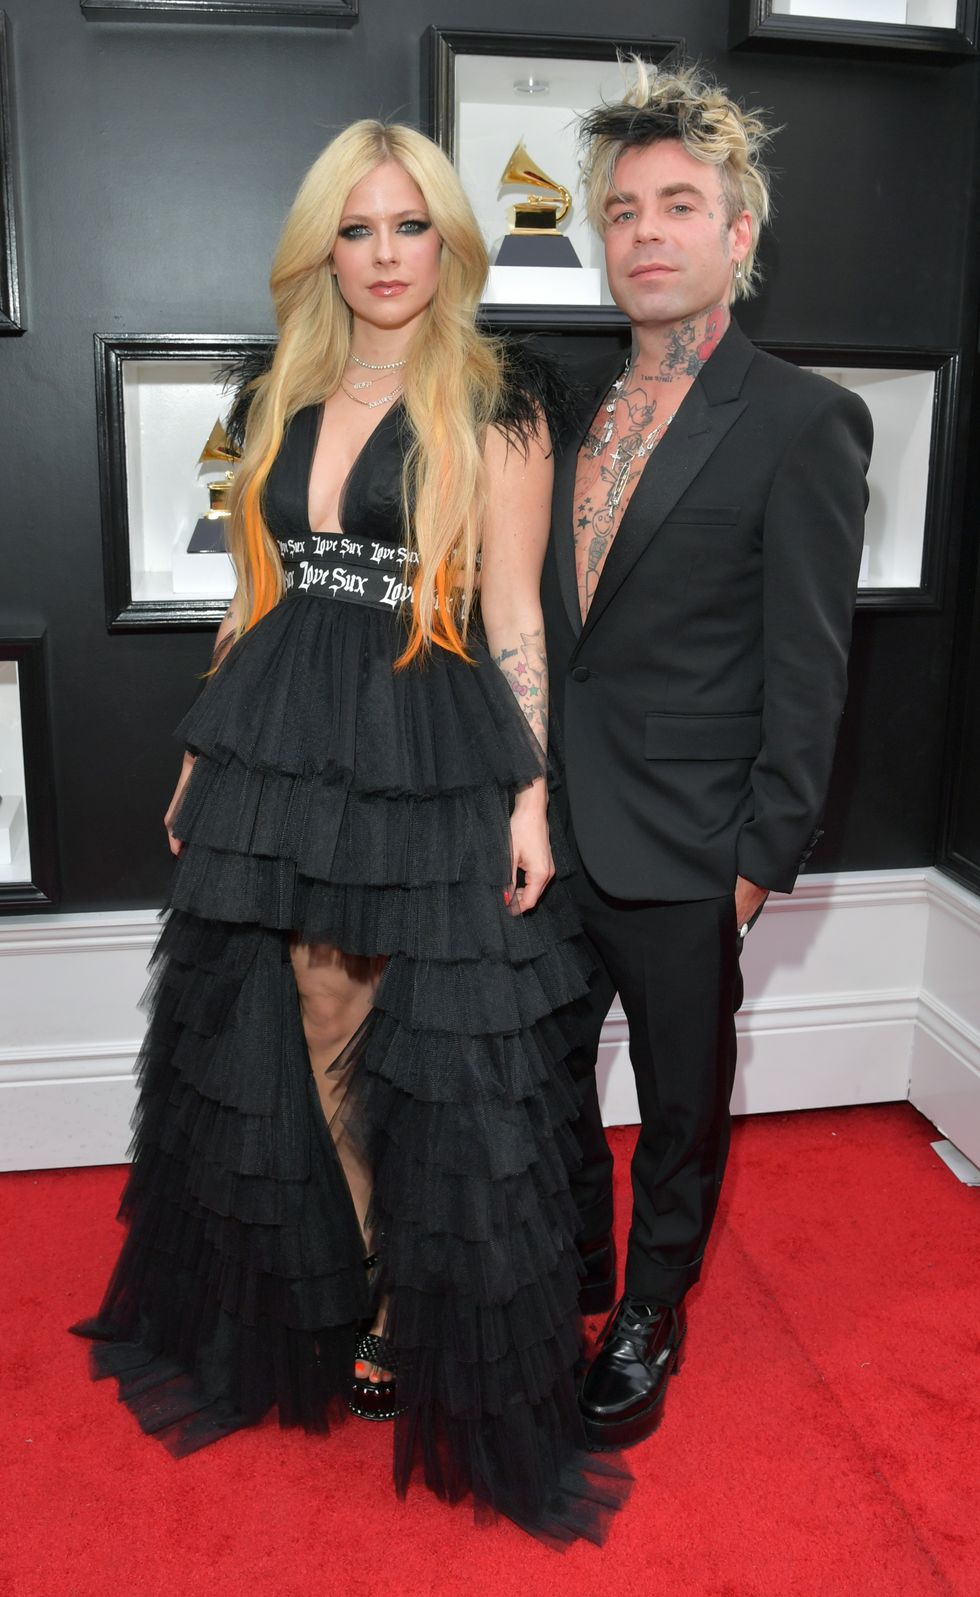 las vegas, nevada april 03 l r avril lavigne and mod sun attend the 64th annual grammy awards at mgm grand garden arena on april 03, 2022 in las vegas, nevada photo by lester cohengetty images for the recording academy